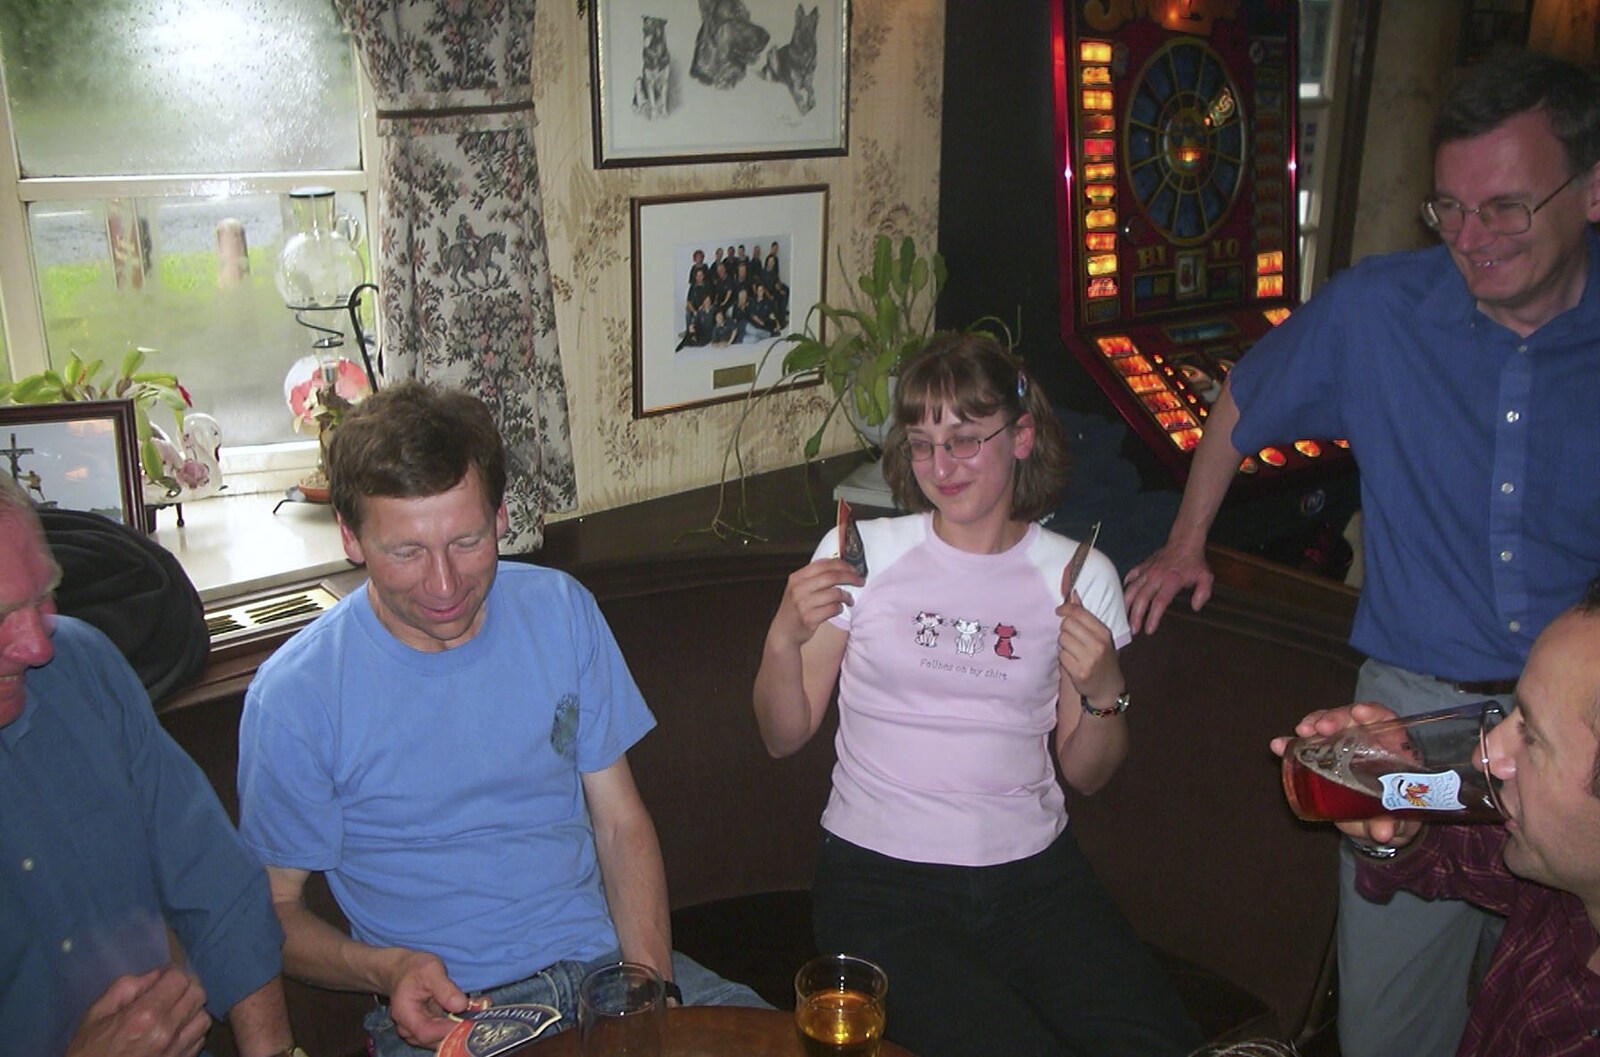 A Rainy Barbeque at the Swan Inn, Brome, Suffolk - 15th June 2002: Suey holds up some beer mats